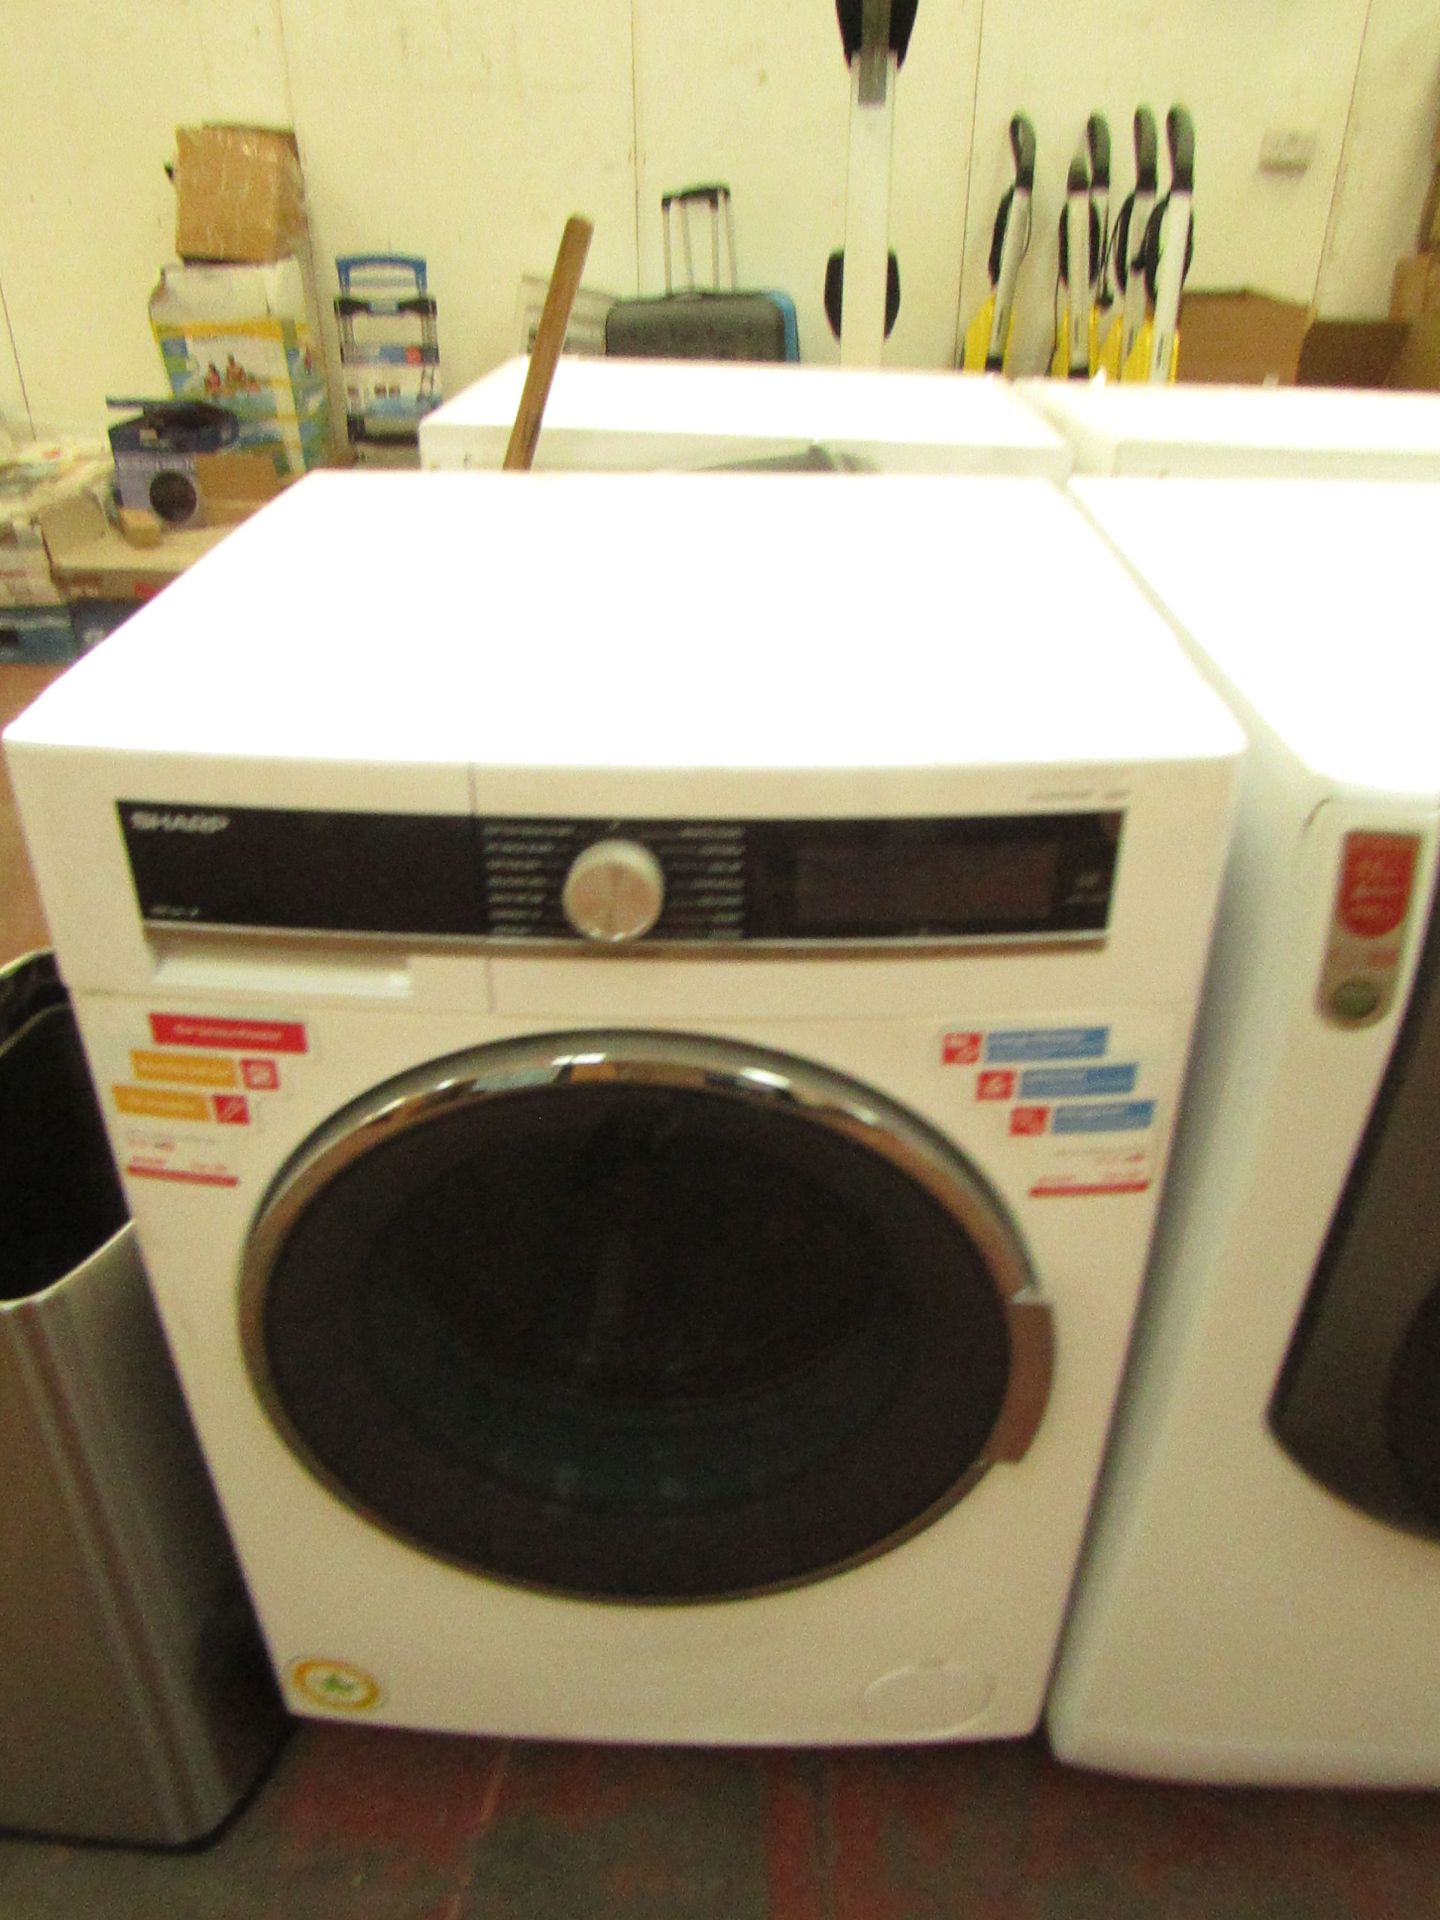 Sharp 9/6KG washer dryer, powers on but doesn't spin.